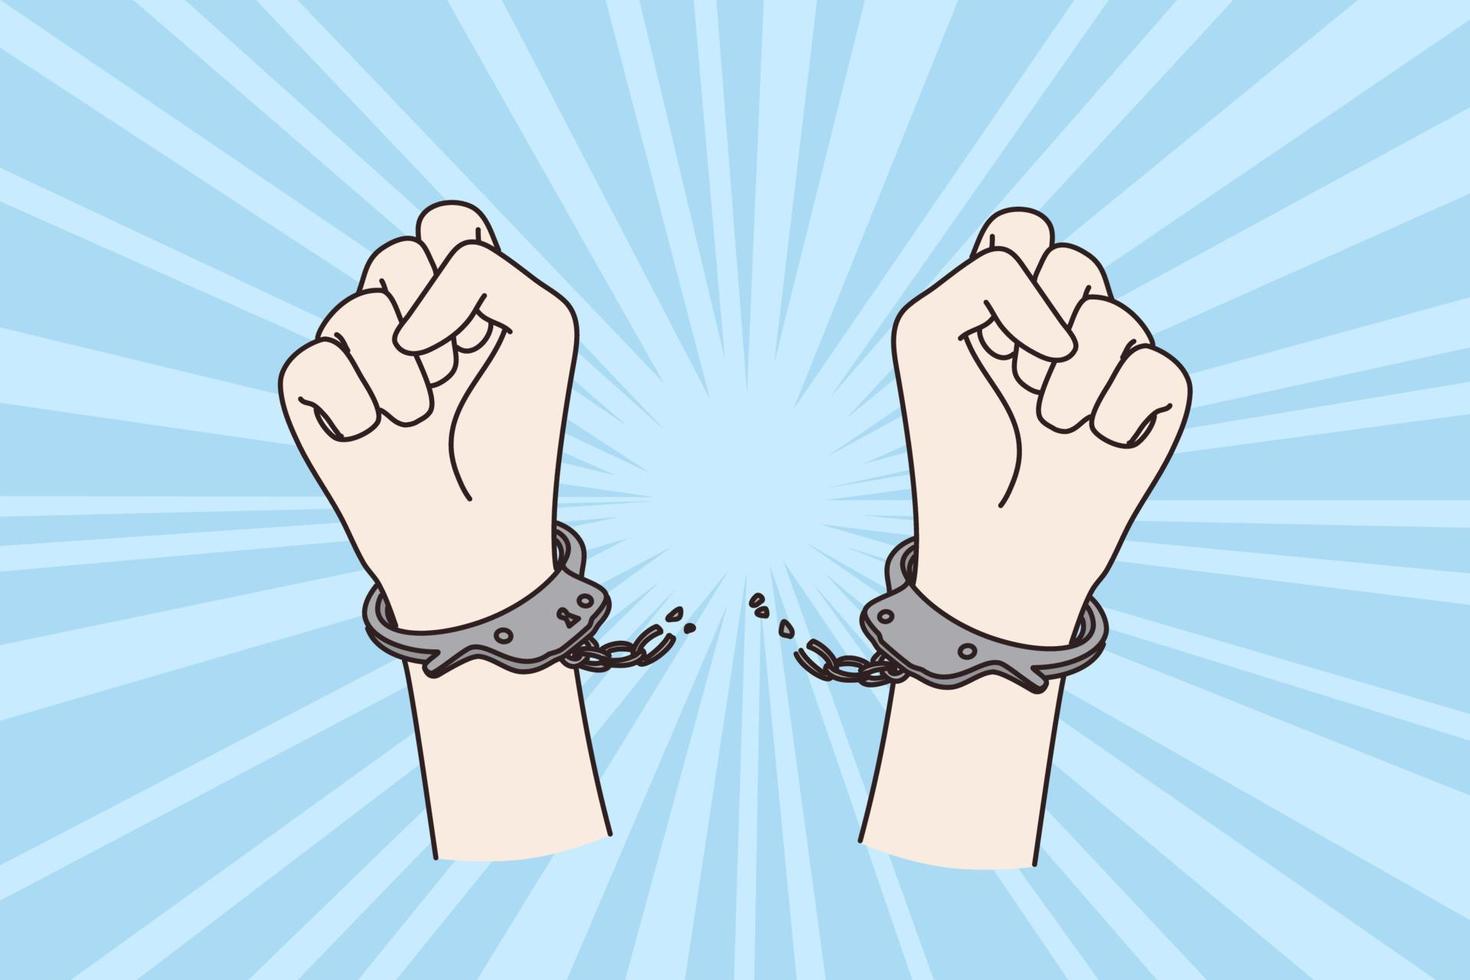 Protest, human rights and fetters concept. Human Raised protest arms fist breaking chains of fetters raising high up knuckles vector illustration